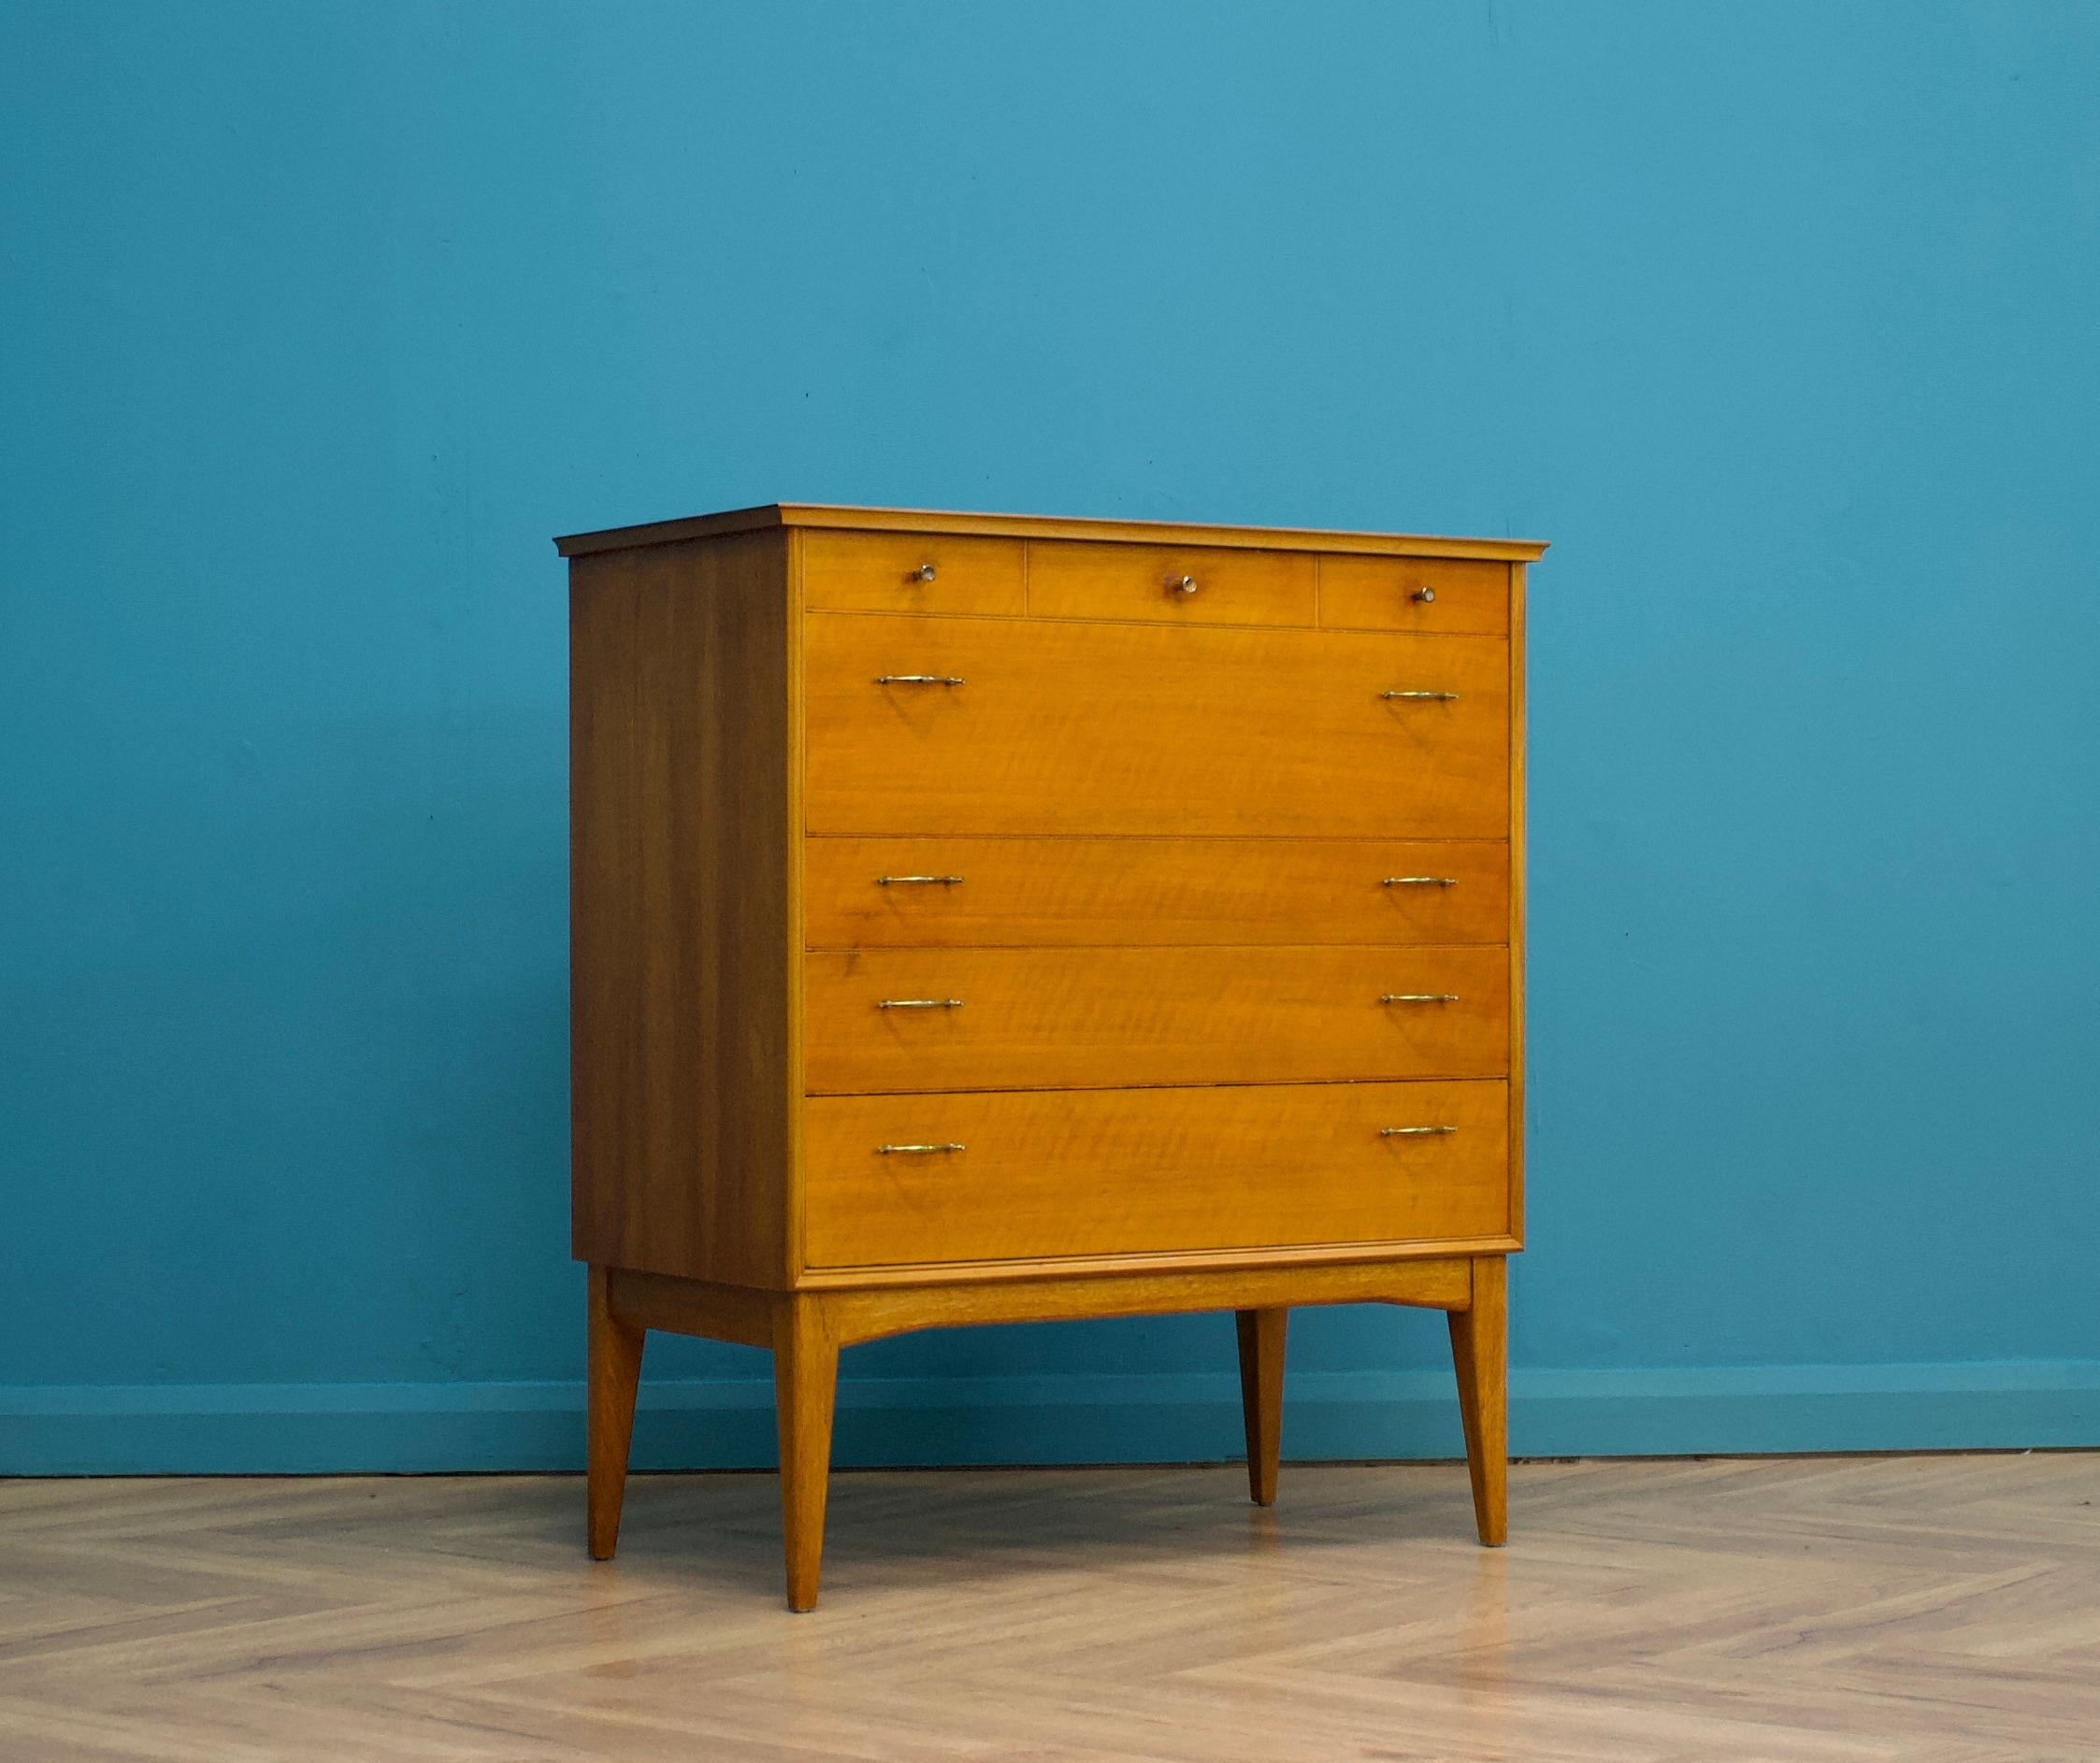 An impressive quality, tall walnut chest of drawers from Alfred Cox - retailed through Heal's during the 1950s
The bank of five drawers stands on long, tapered, splayed legs
